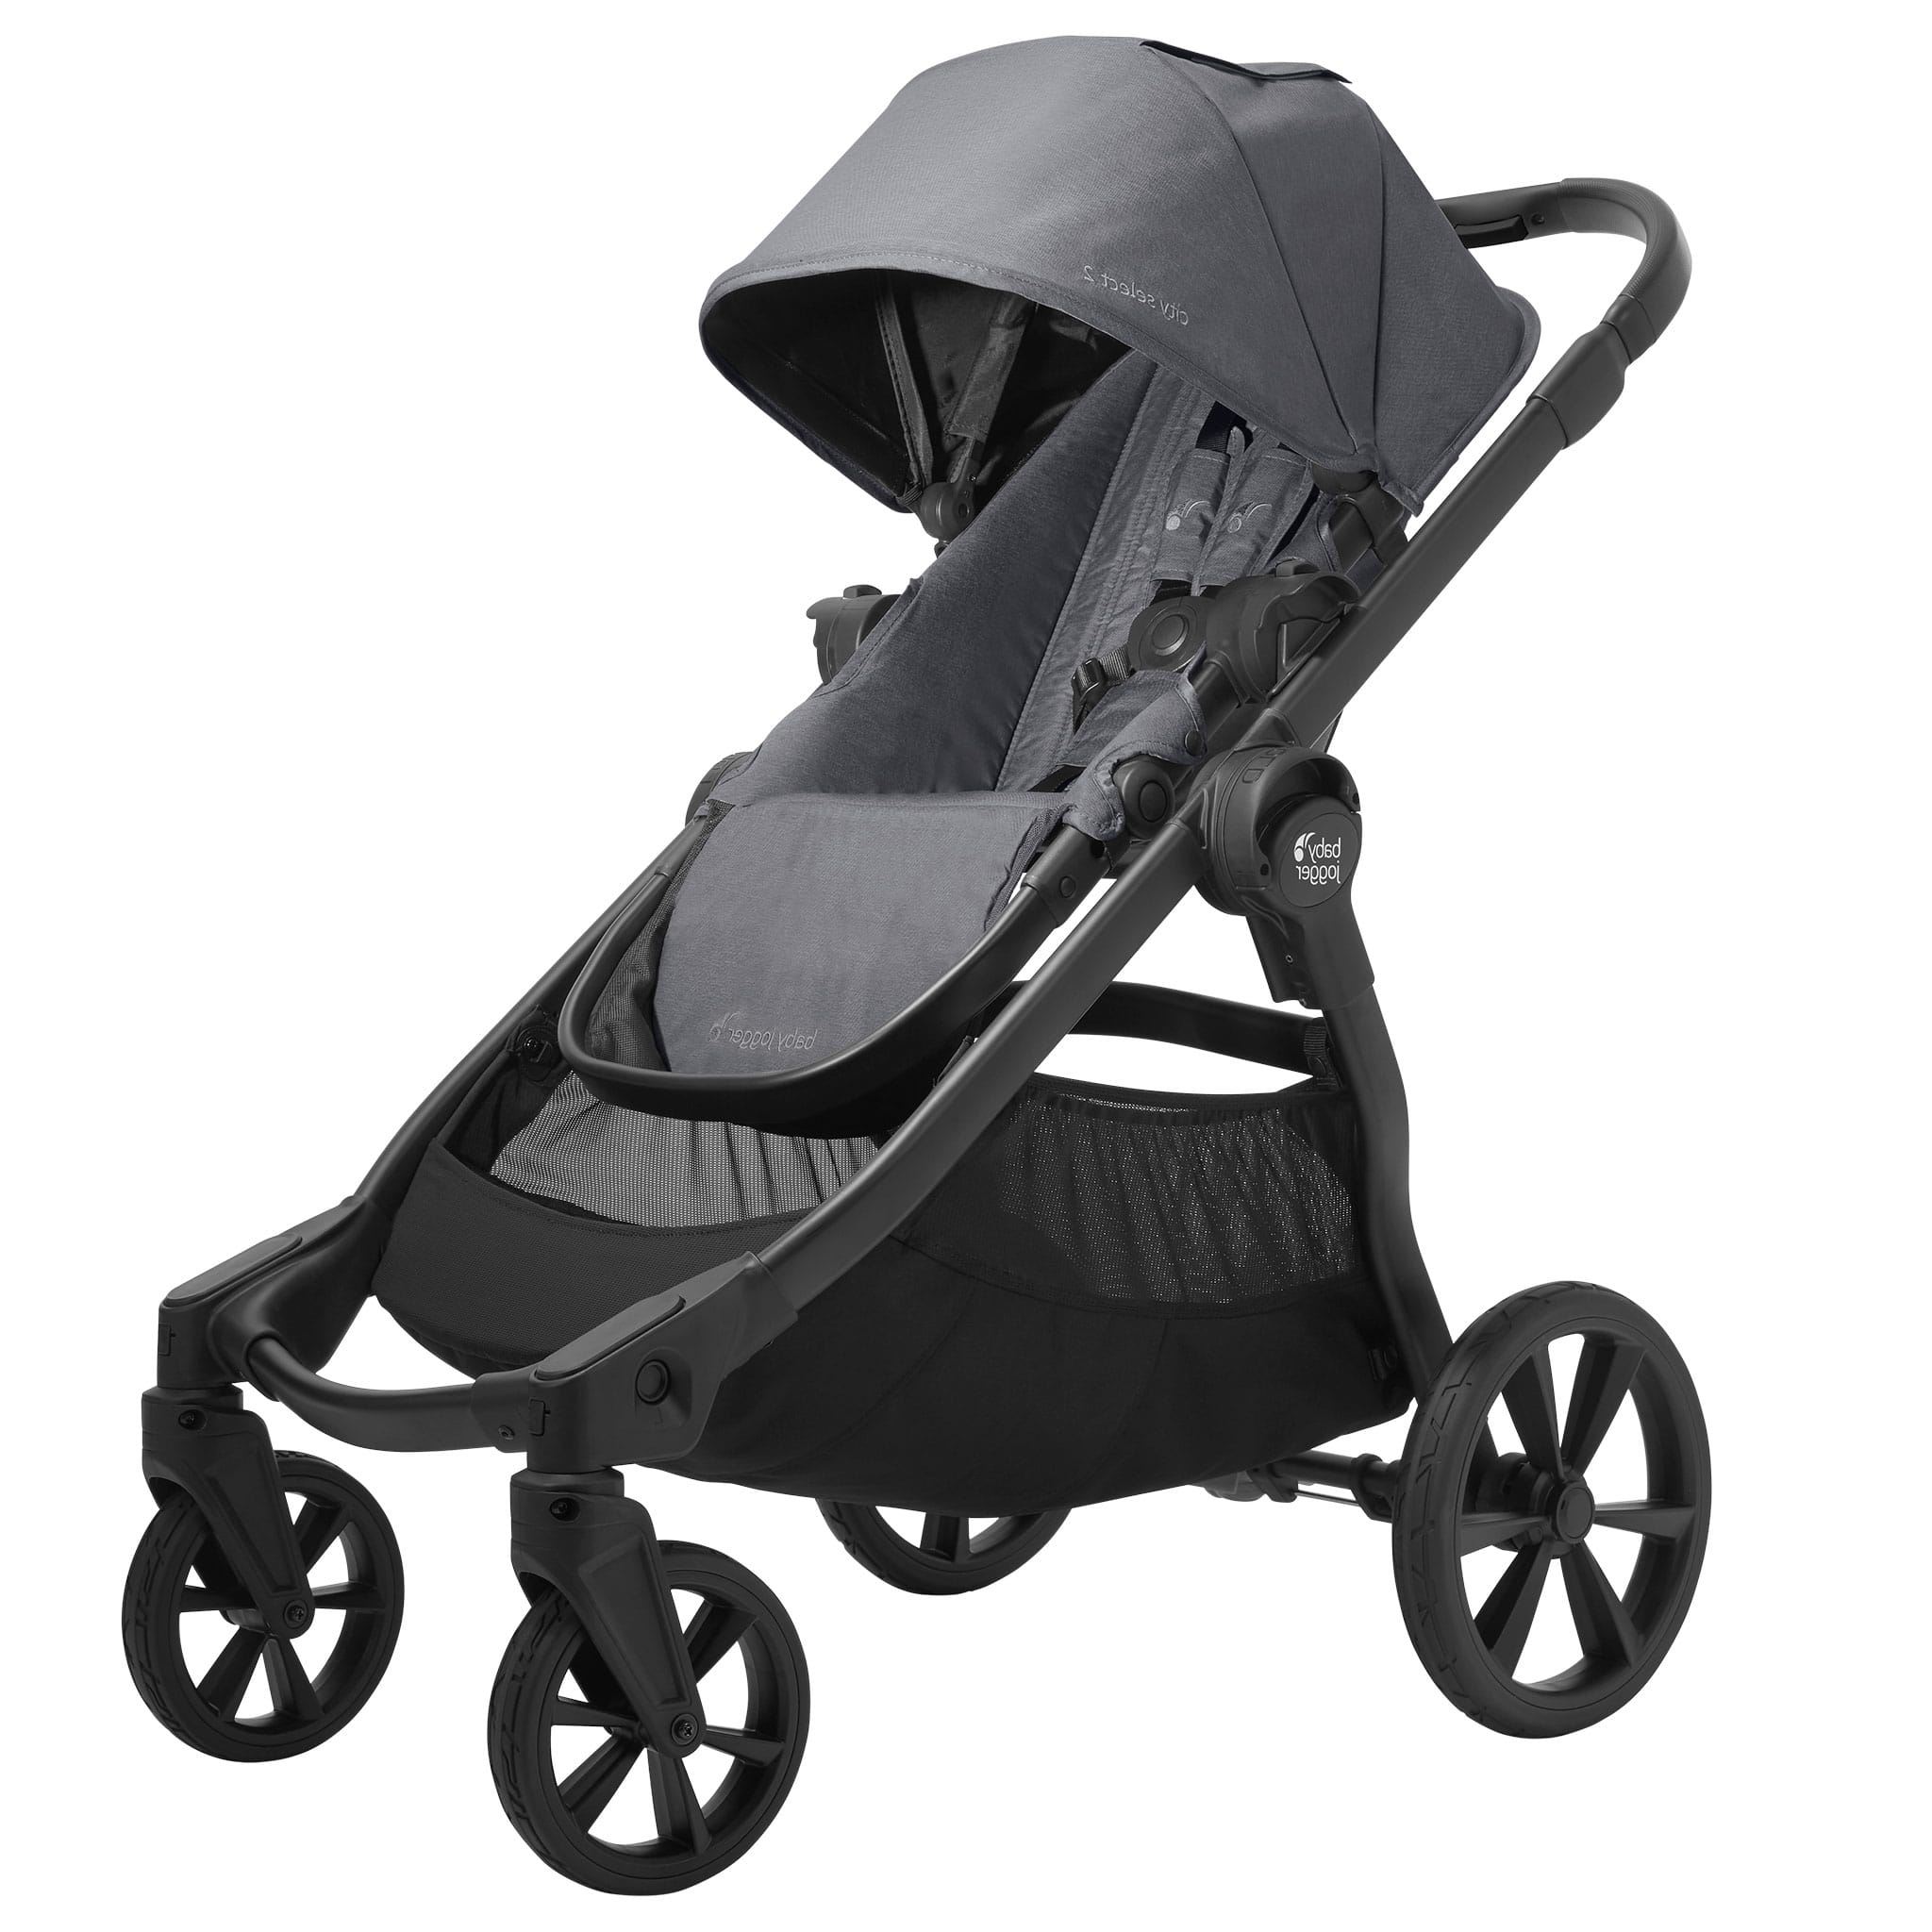 Baby Jogger: wózek spacerowy City Select 2